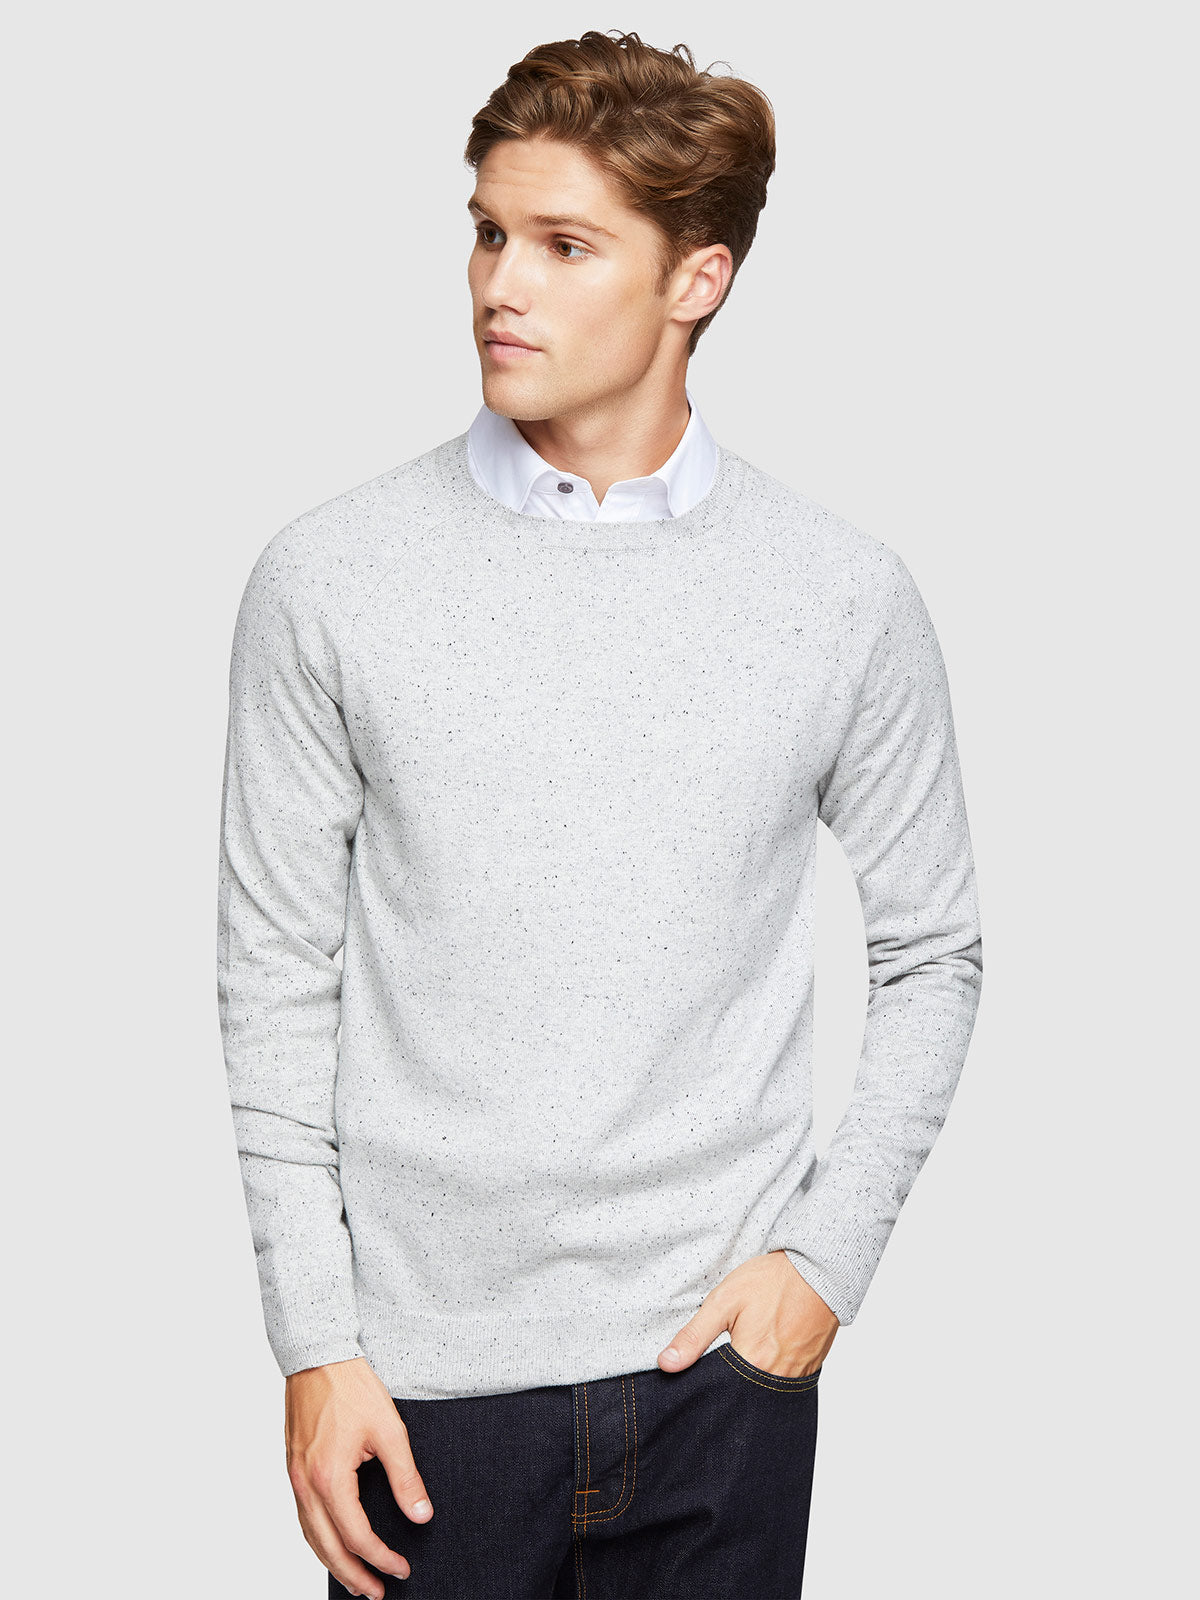 JACK DONEGAL CREW NECK KNIT